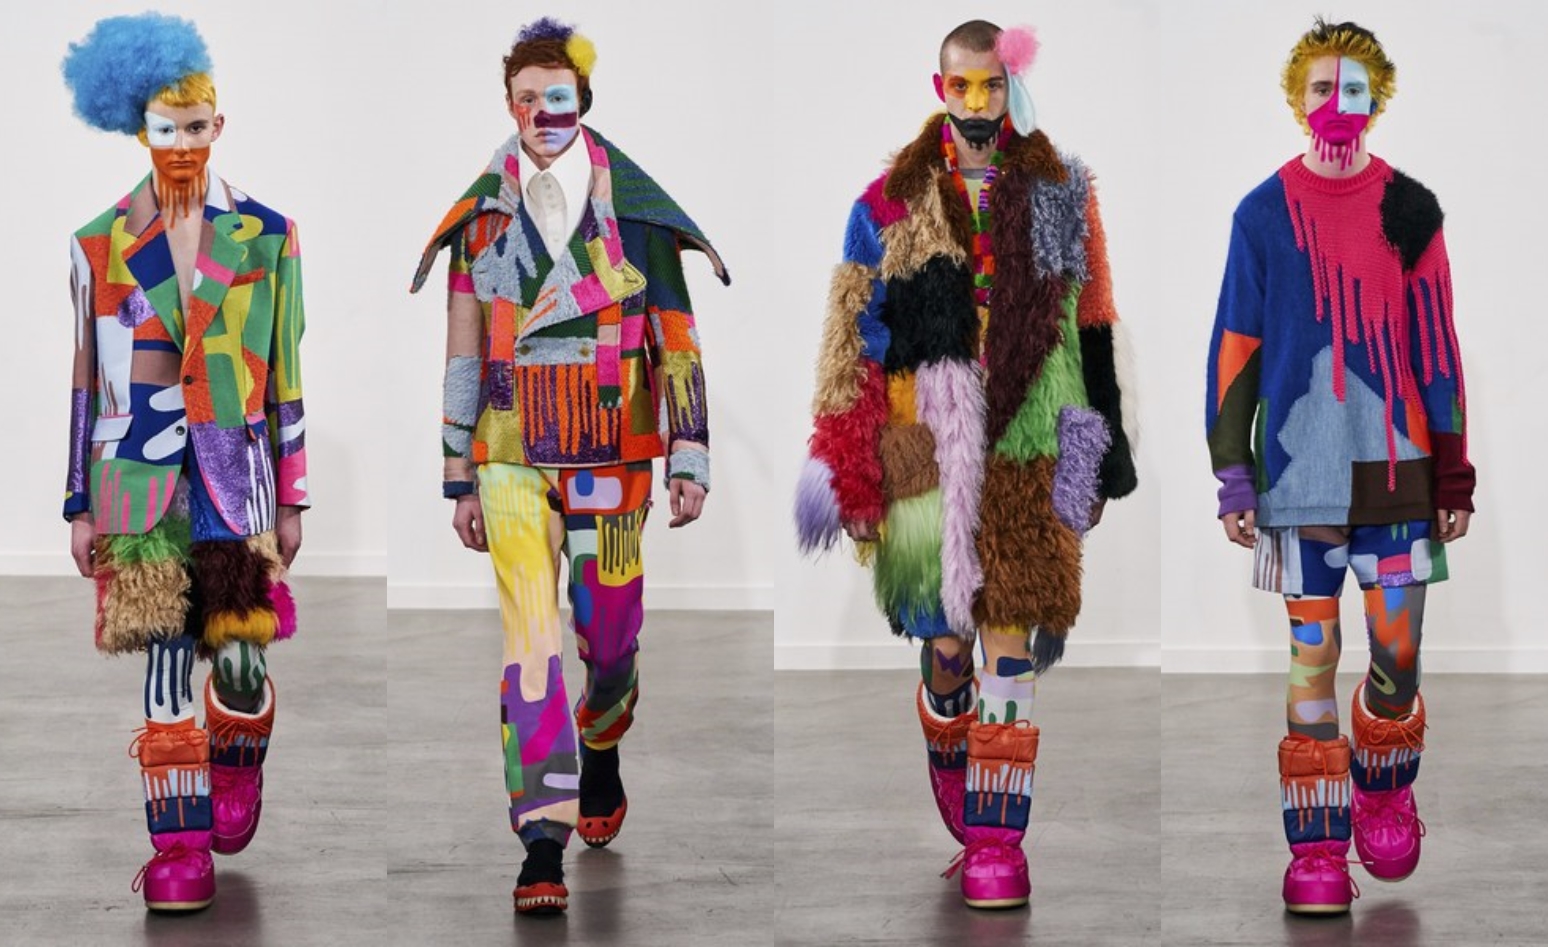 FASHION BY THE RULES: Walter van Beirendonck fall 2019 men's